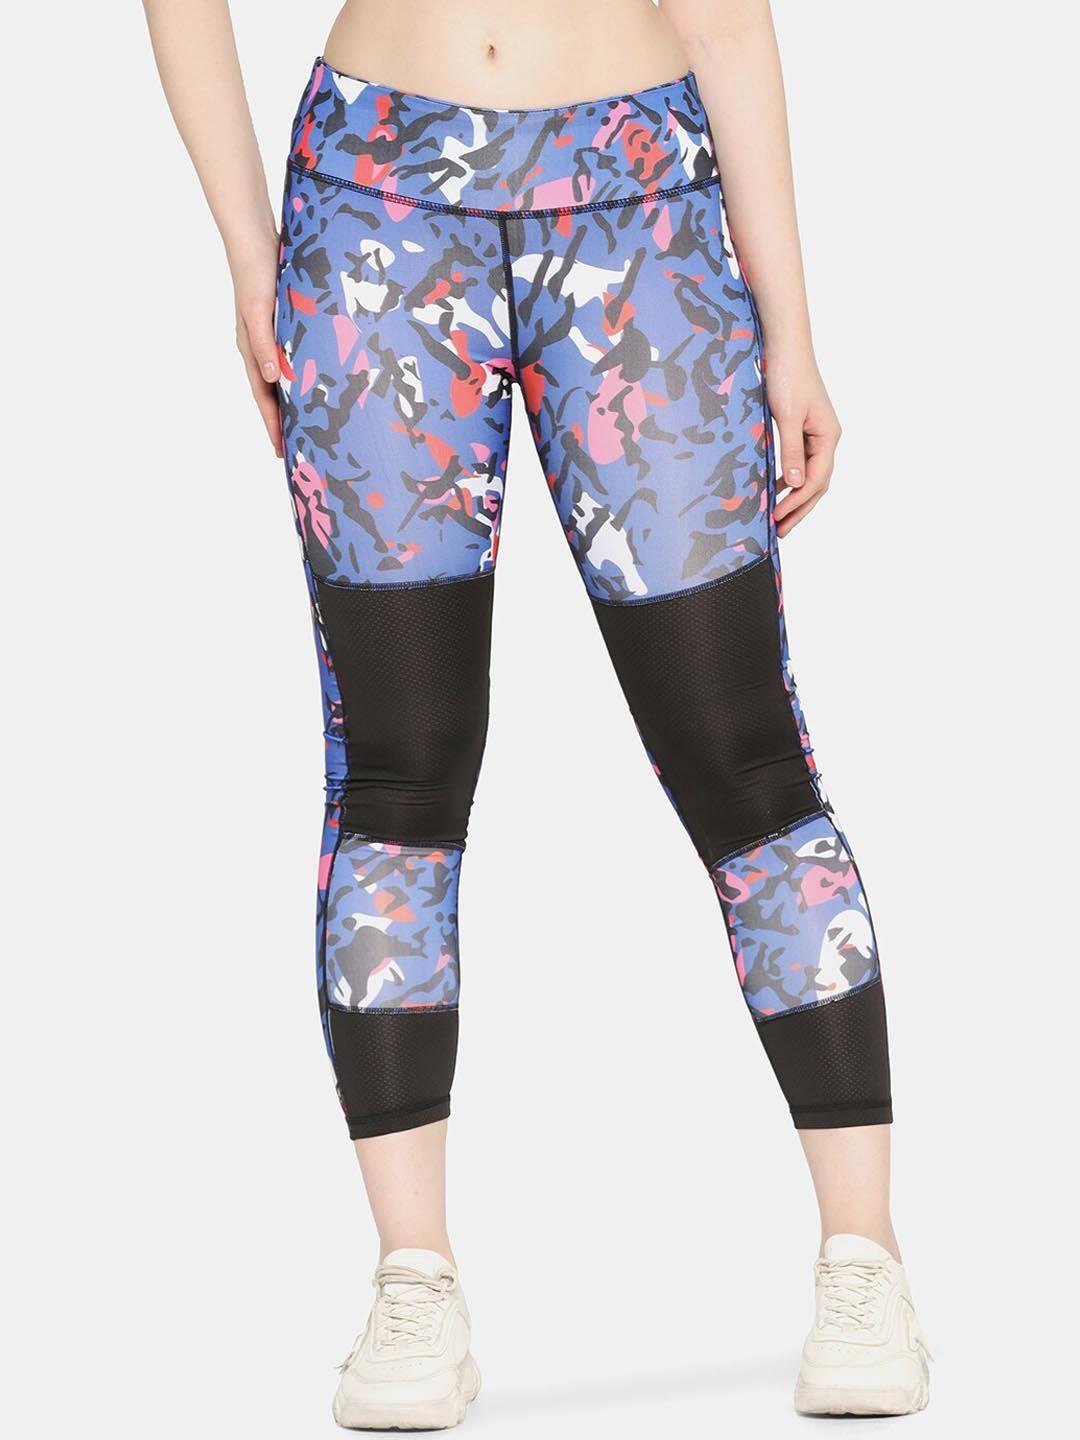 da intimo women printed dry-fit ankle-length training or gym sports tights